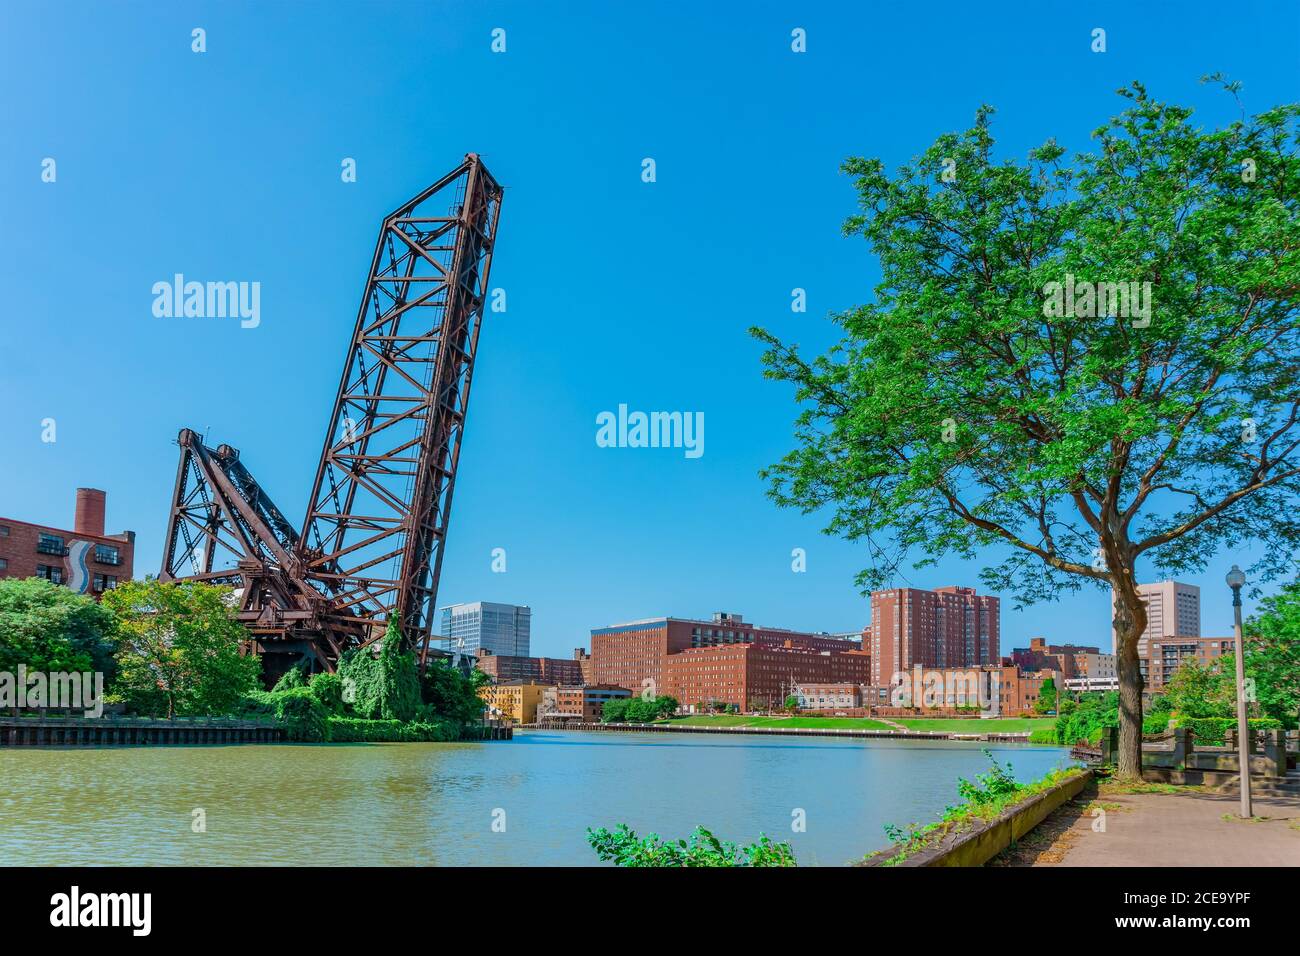 Cuyahoga River runs by a raised draw bridge and through the town of Cleveland, Ohio. Parks and brick buildings line both sides of the water. Stock Photo